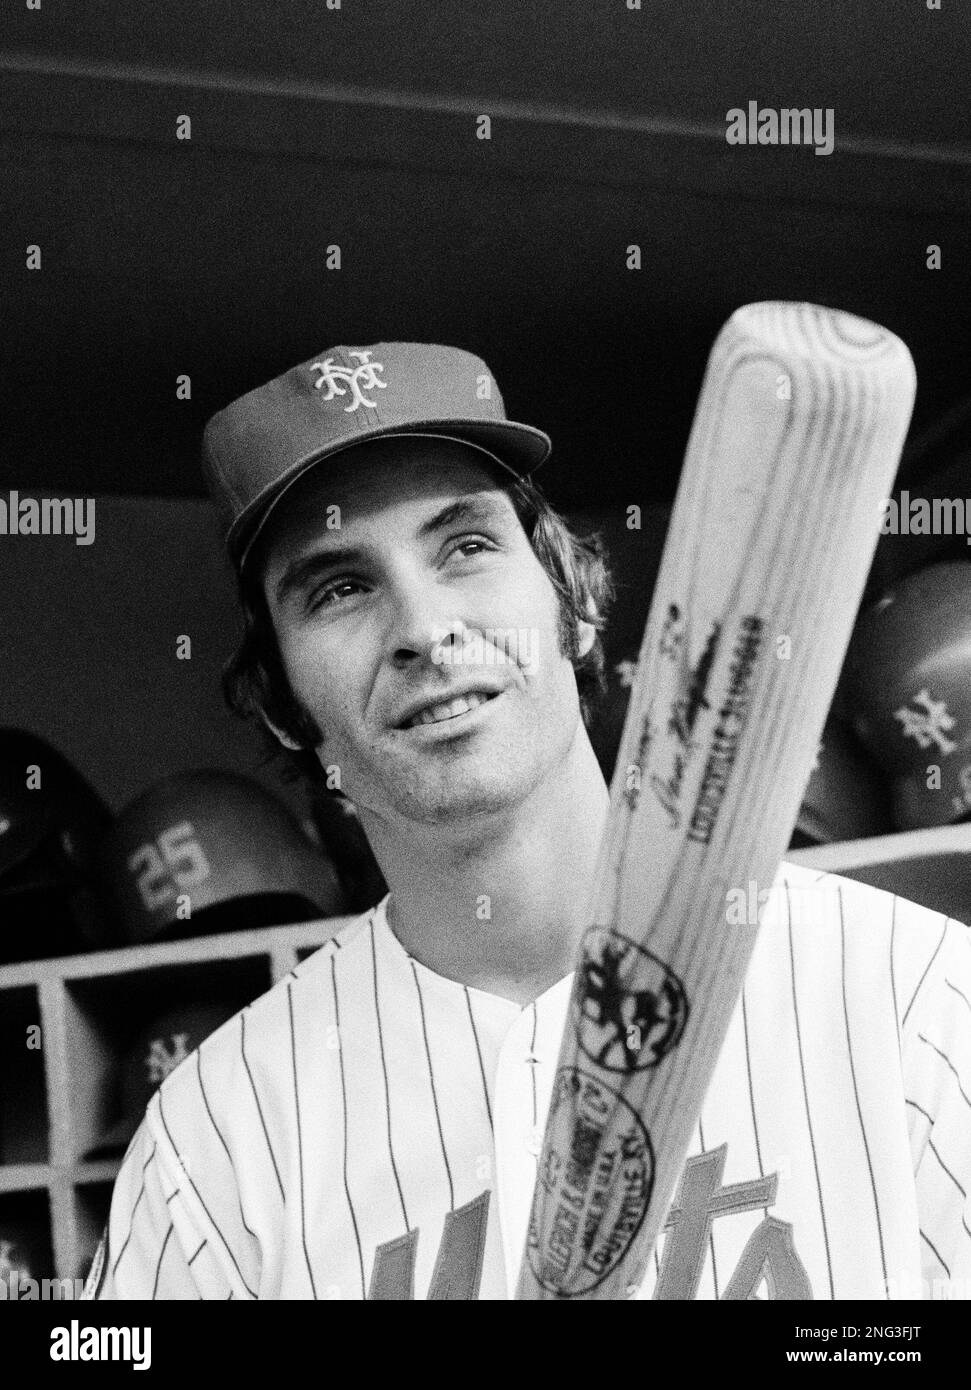 New York Mets Dave Kingman, home run specialist, relaxes running a boat  after an exhibition game in Indian Rocks, Fla., March 15, 1977. Aaron, son  of Philadelphia Phillies Bob Boone, rides in